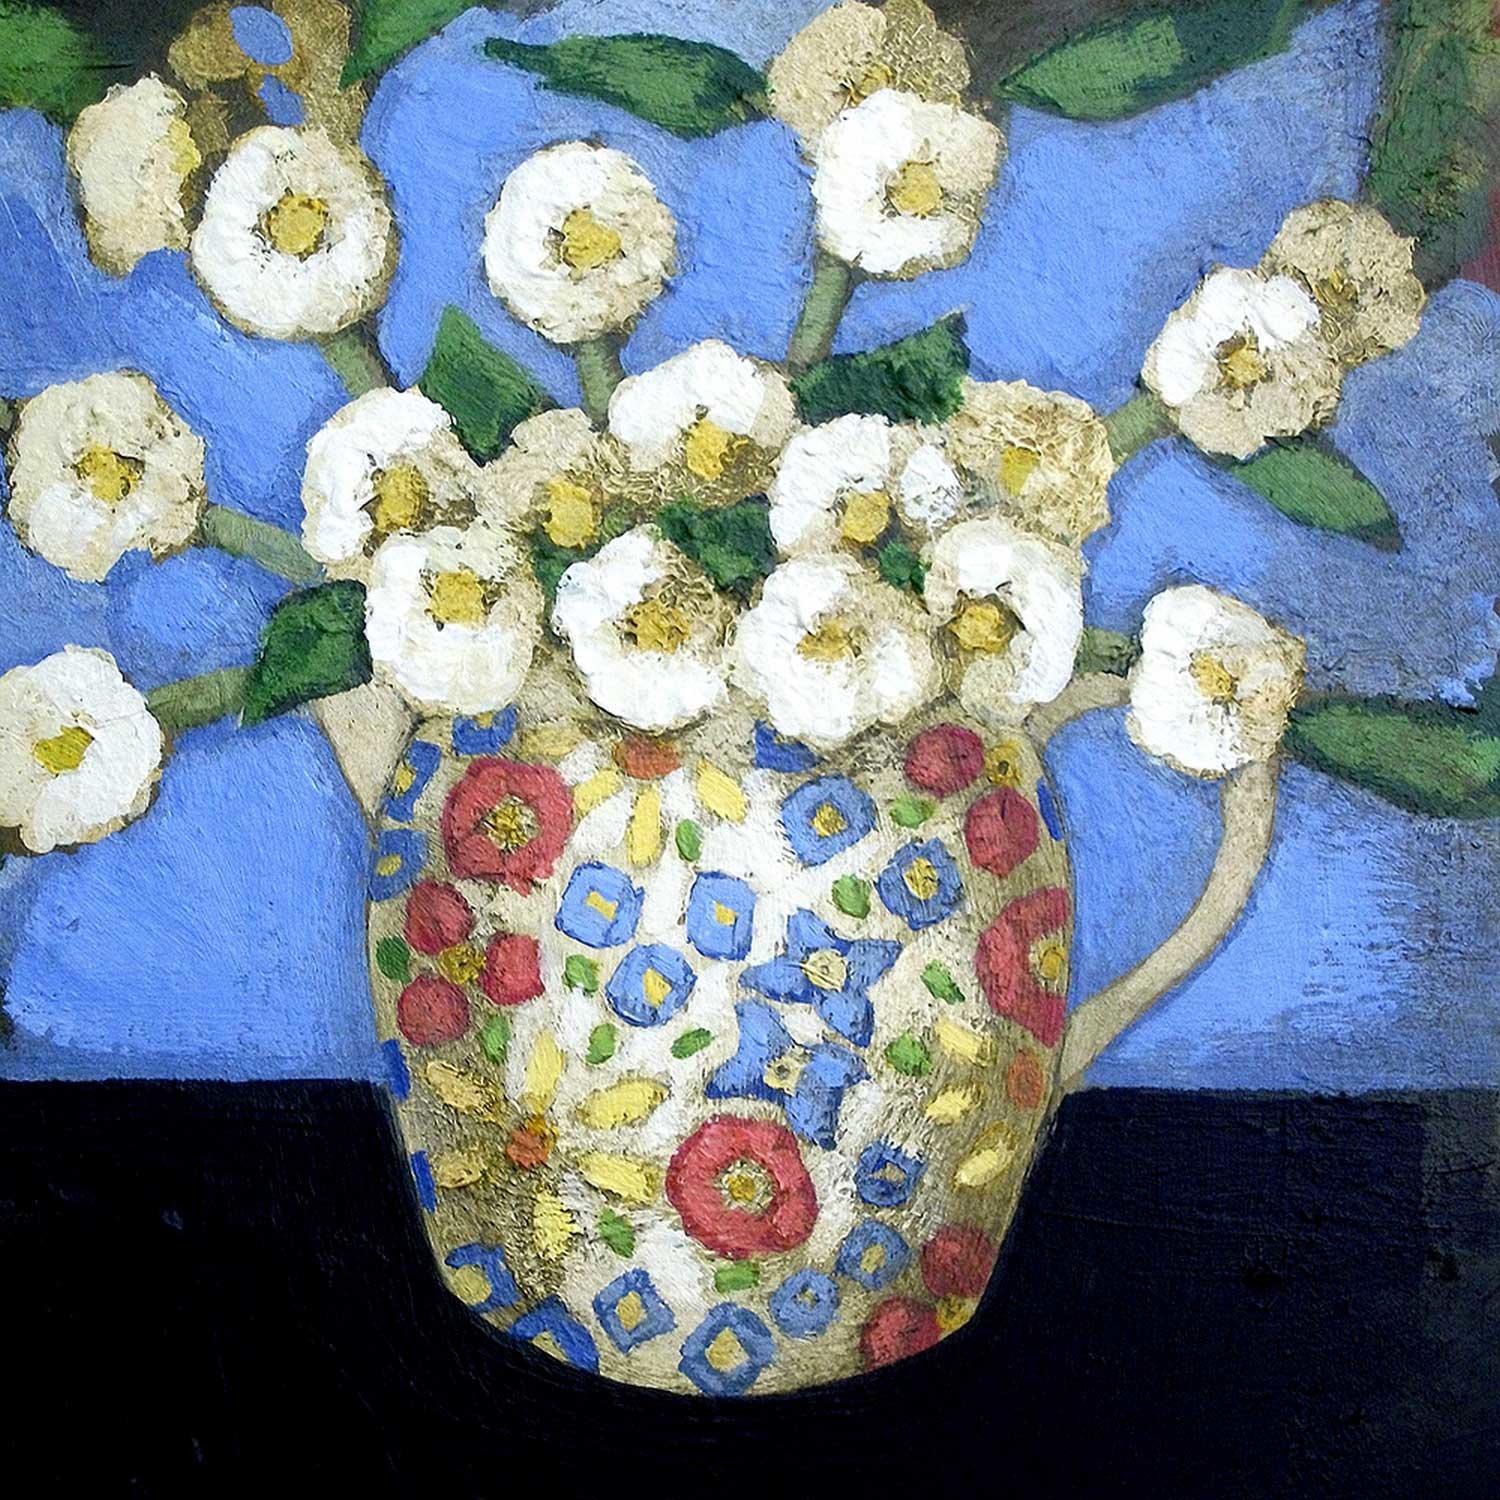 Blossoms in a Jessie M King Jug by Fiona Millar